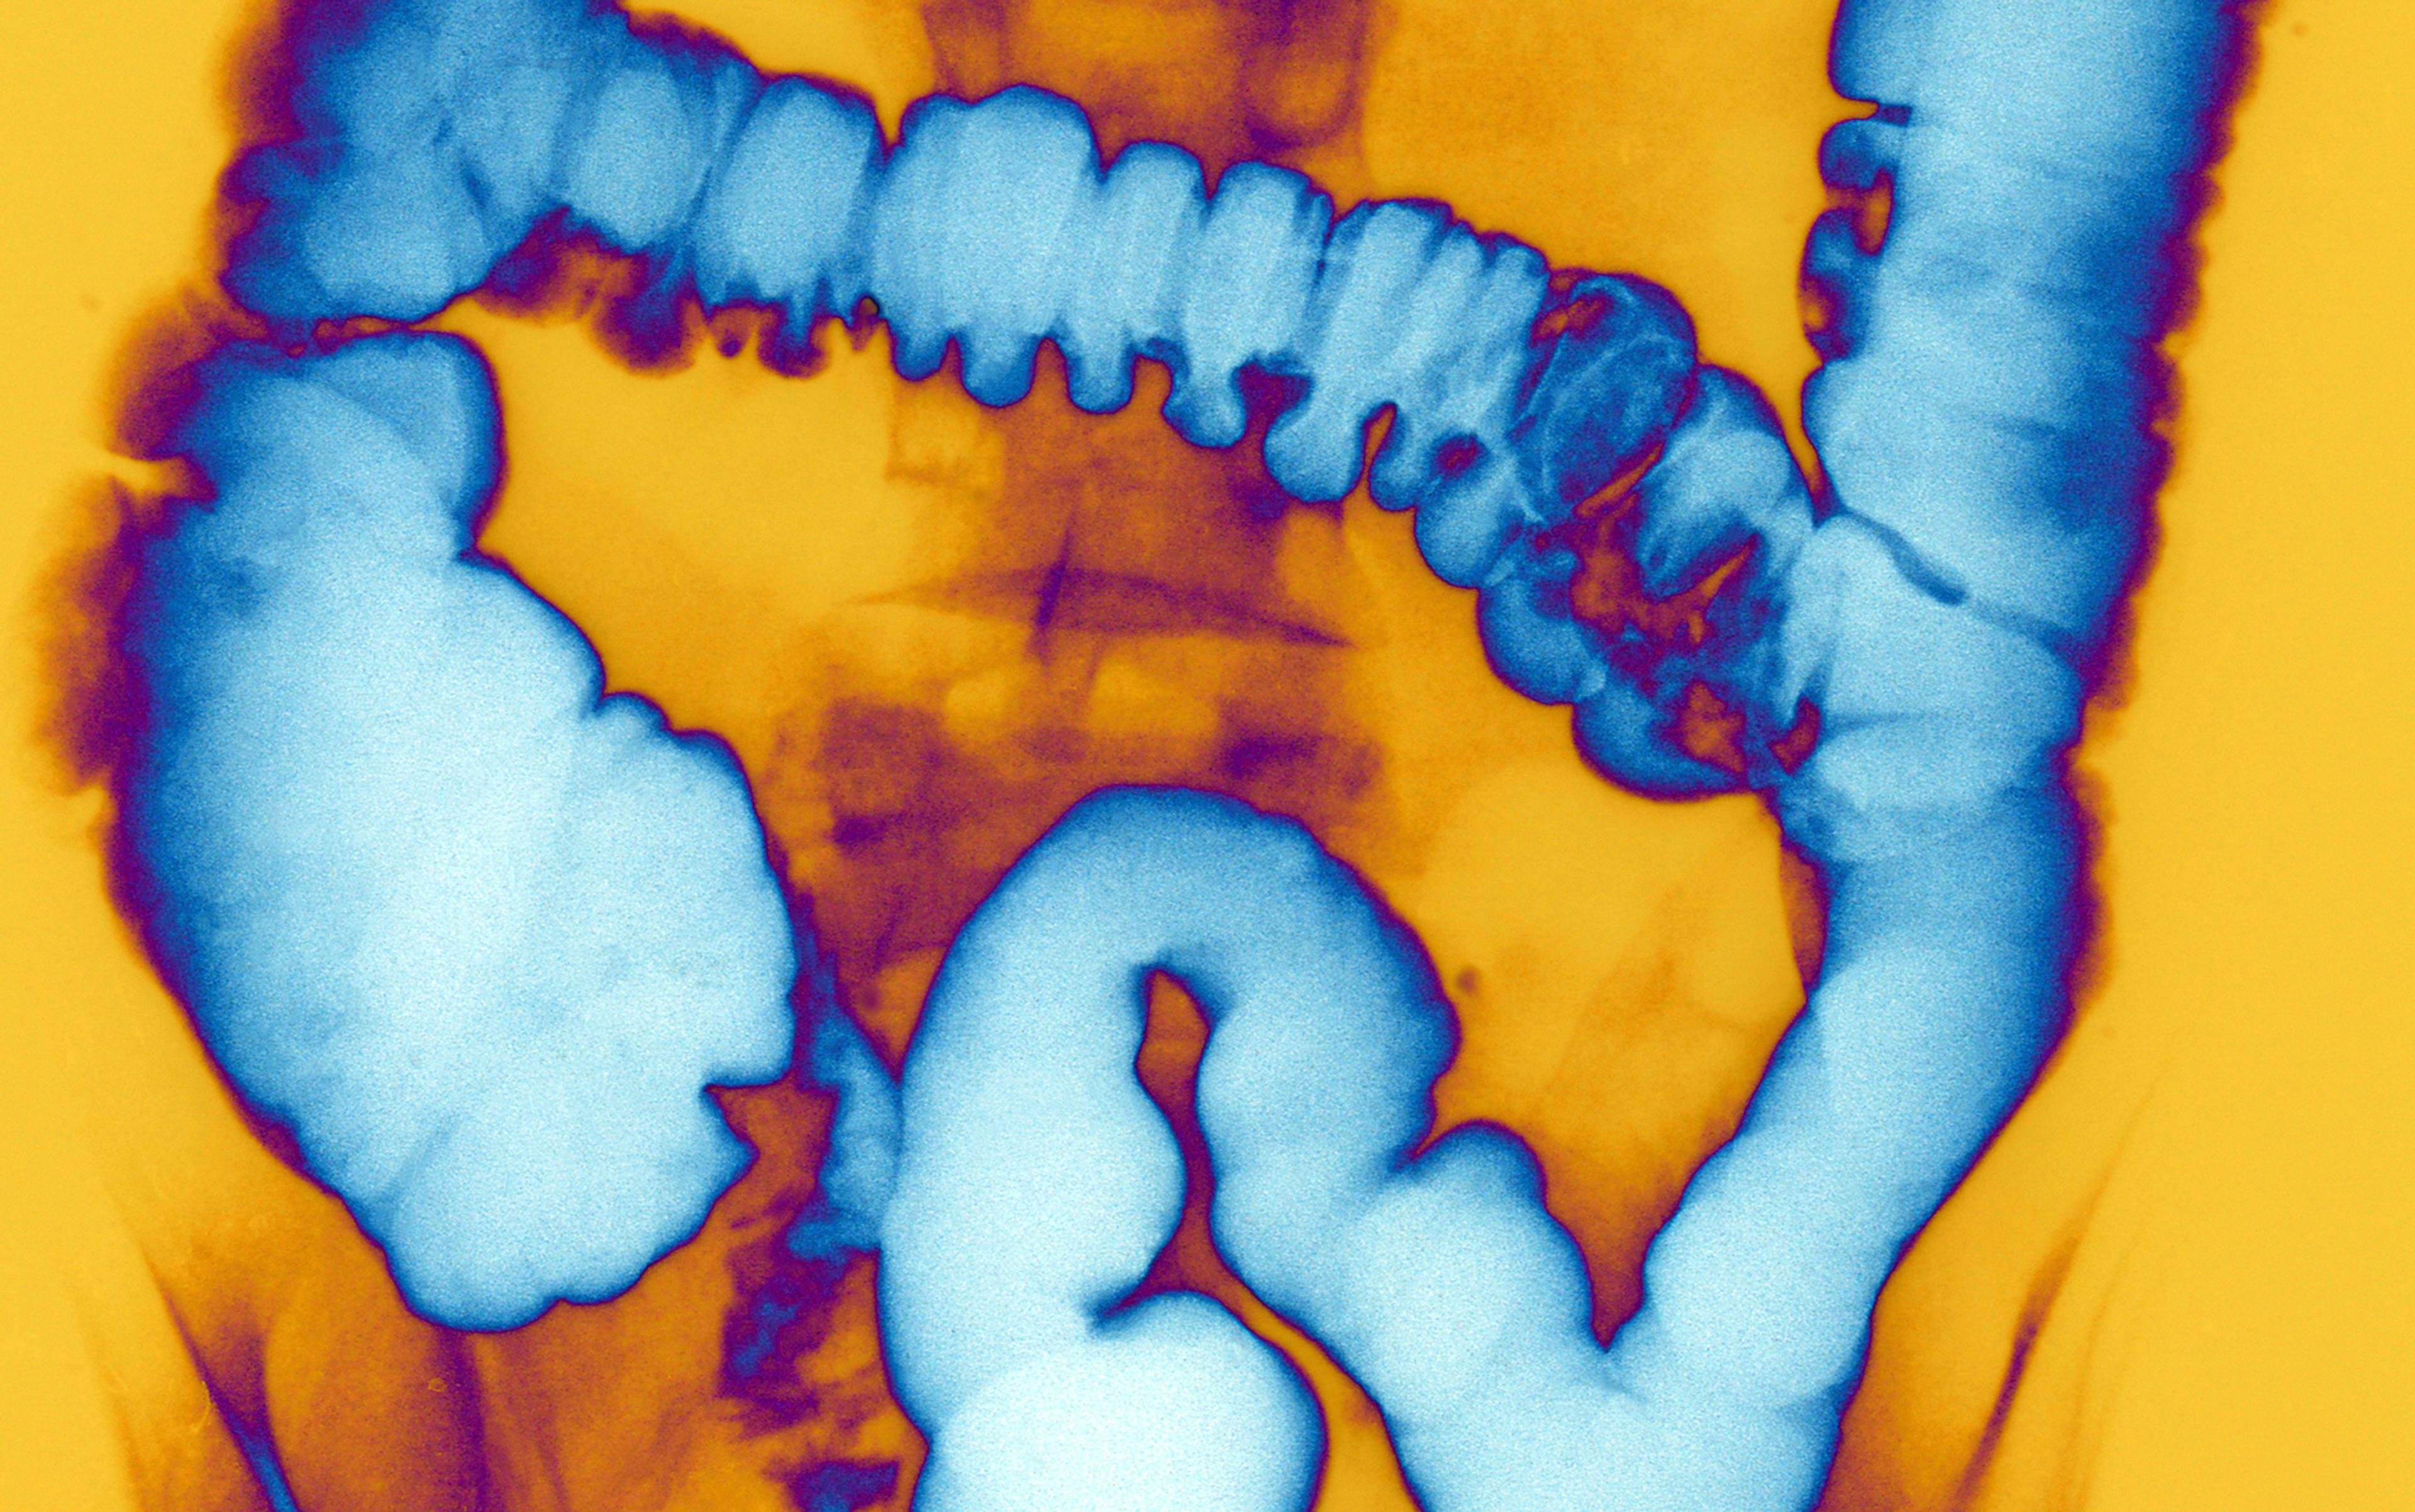 Image of a human colon highlighted in blue, with a contrasting yellow-orange background, taken using a medical imaging technique to show the internal structure.